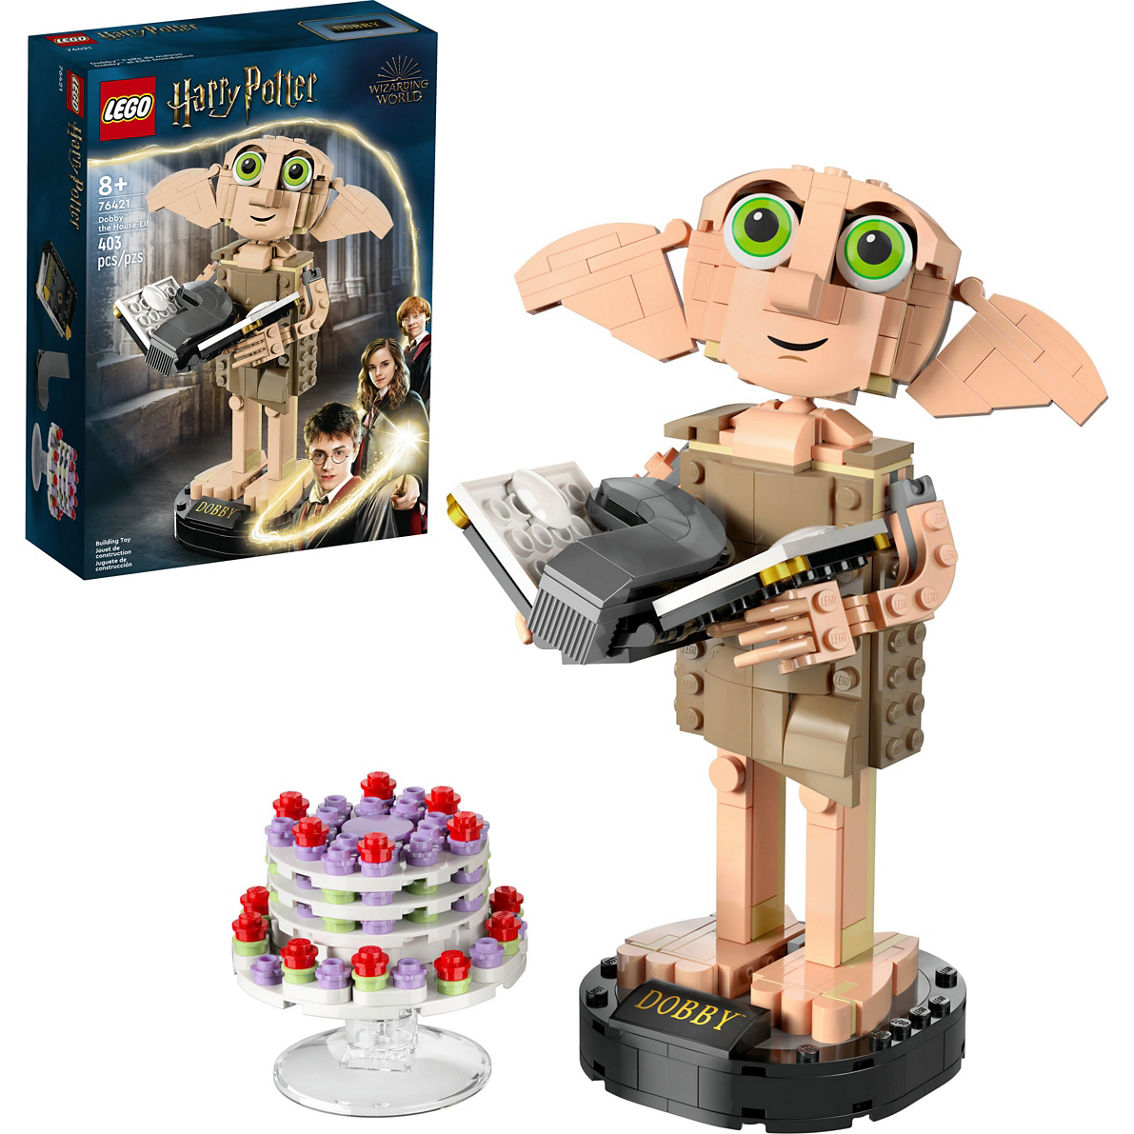 LEGO Harry Potter Dobby the House-Elf Build and Display Set 76421 - Image 3 of 10